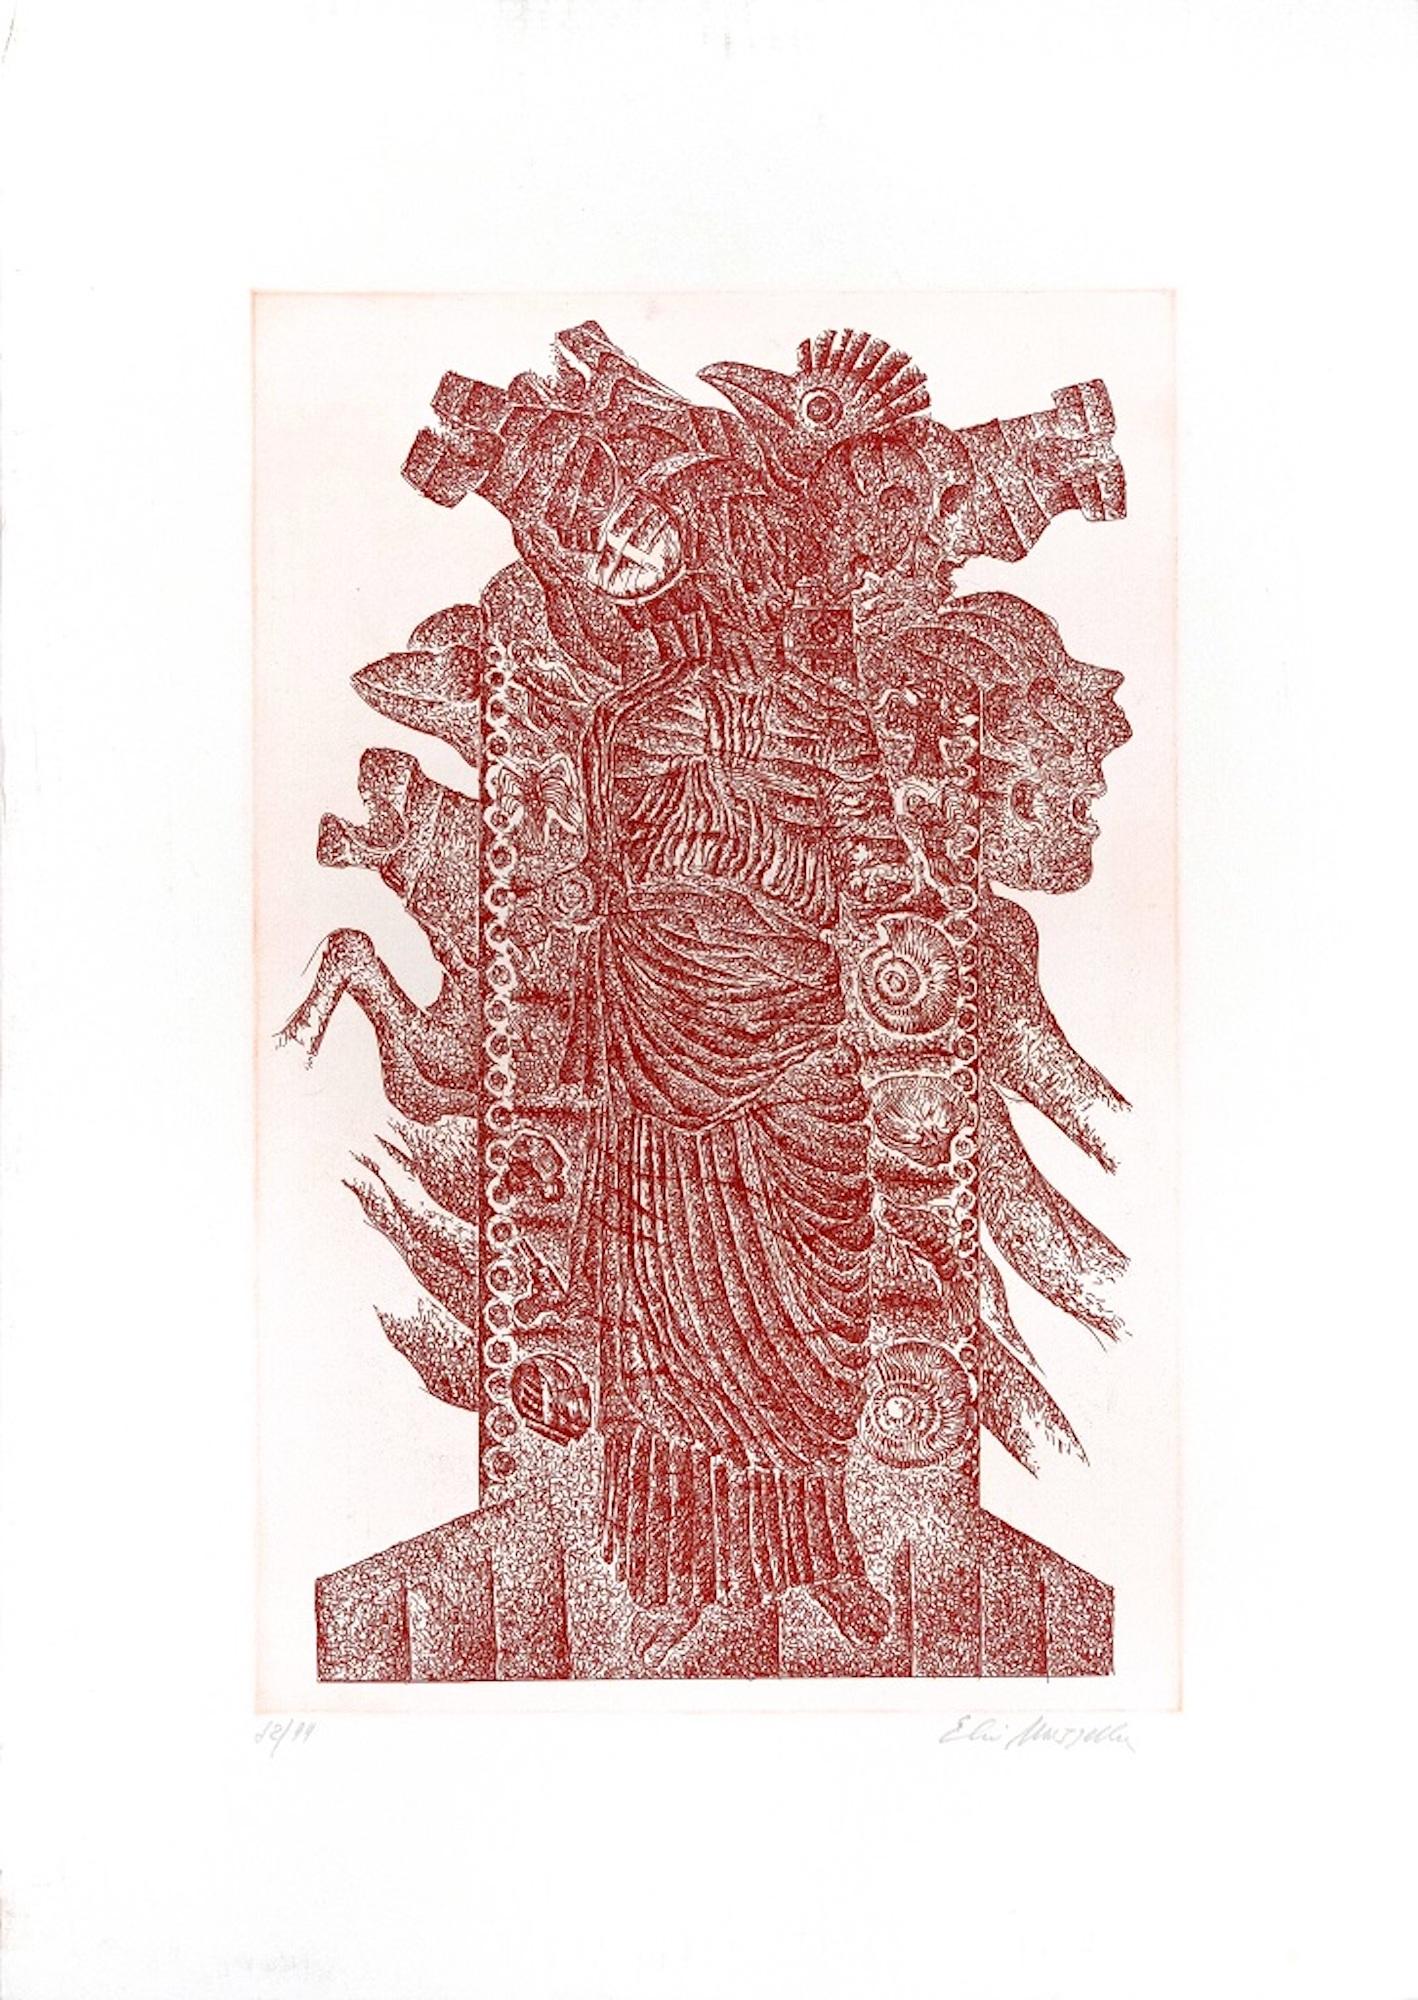 Totem - Etching by Elio Mazzella - 1970s